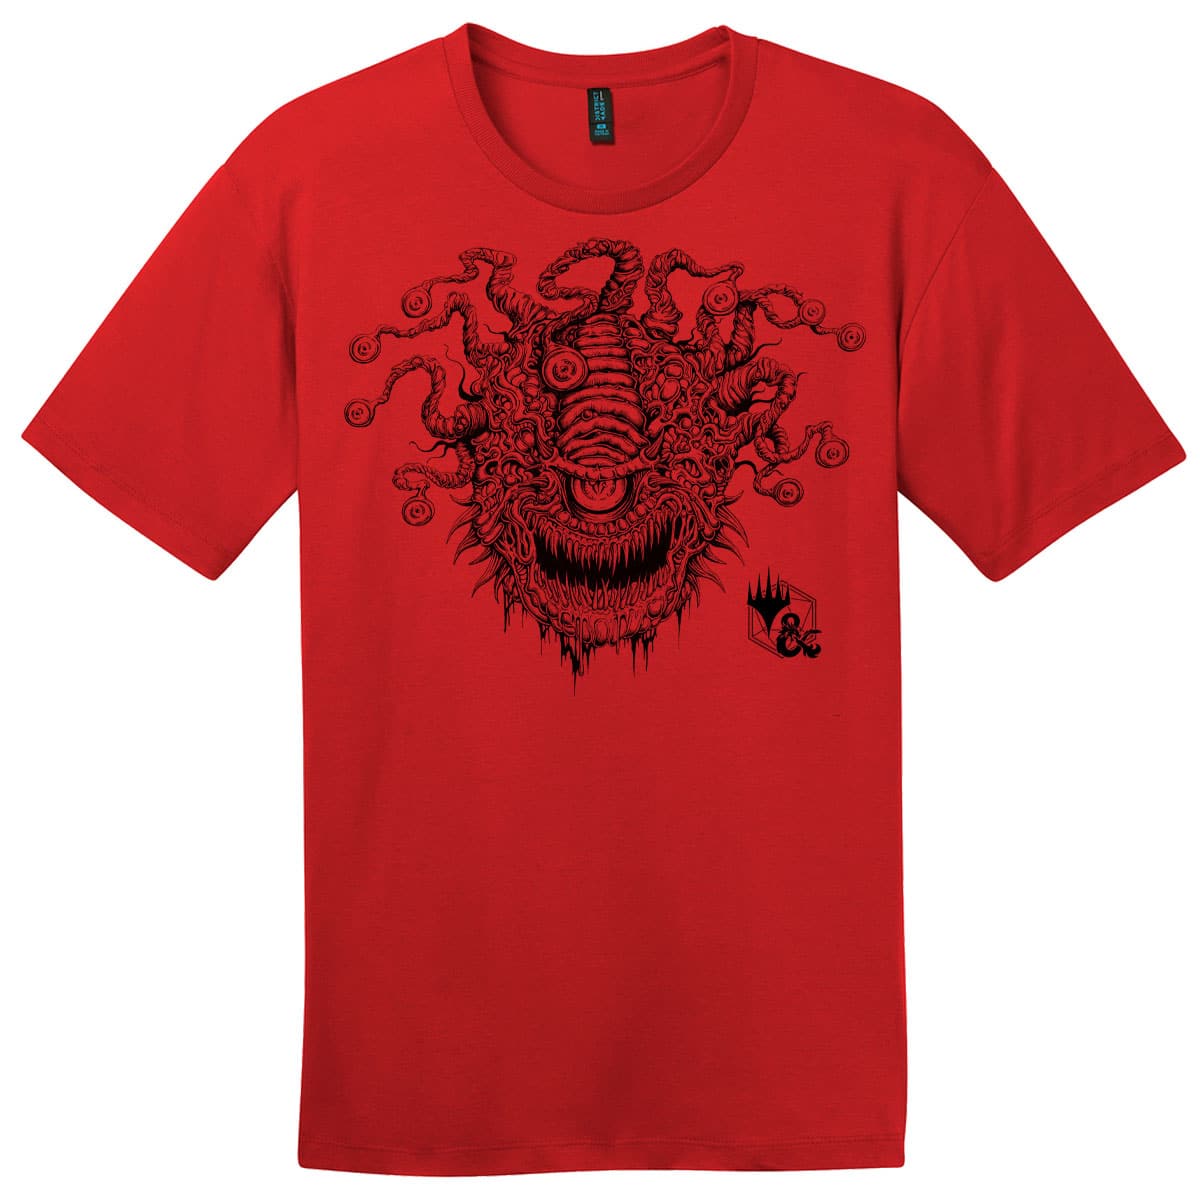 Adventures in the Forgotten Realms Baleful Beholder T-Shirt for Dungeons & Dragons - MTG Pro Shop